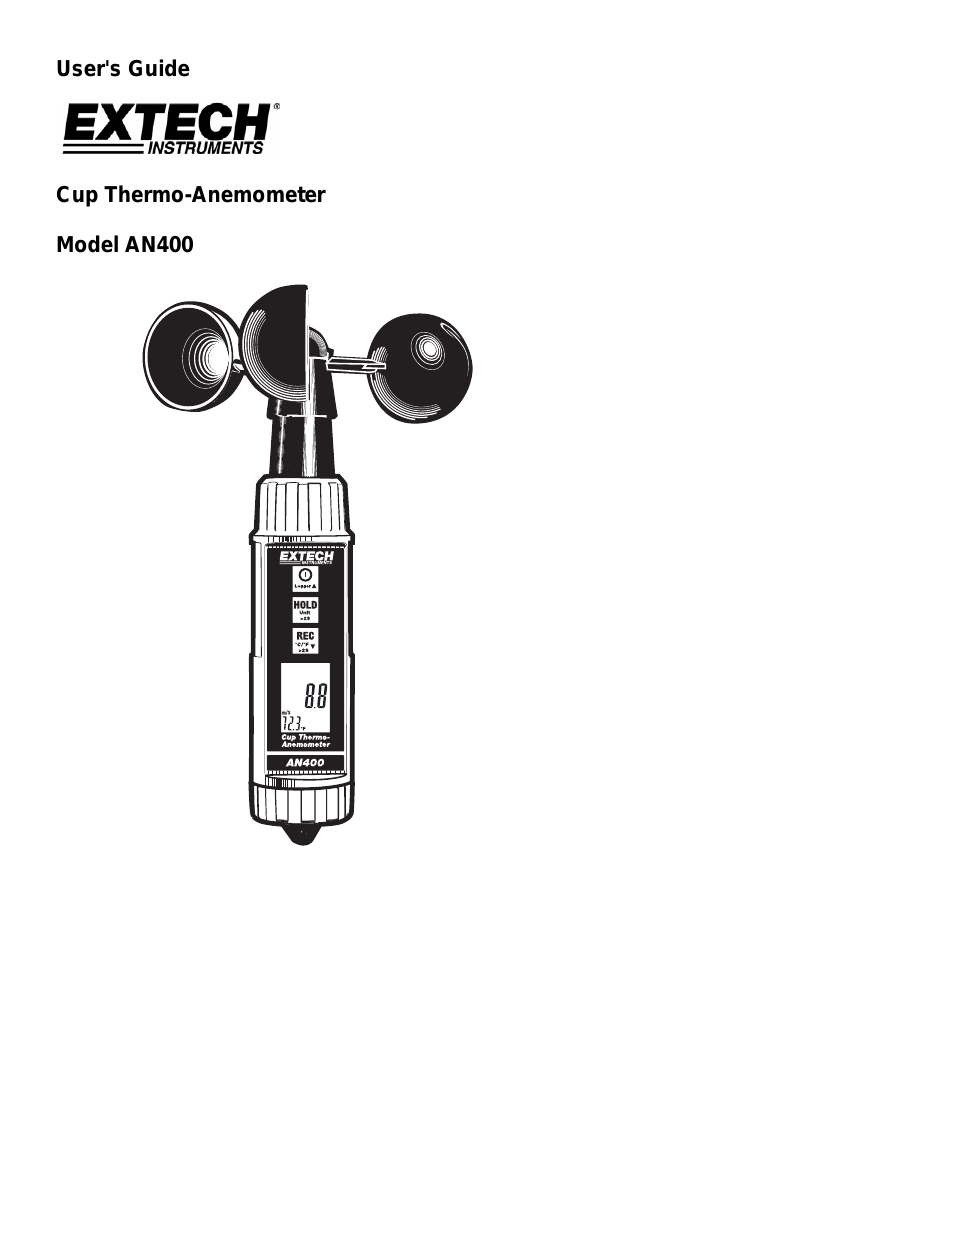 AN400 PORTABLE ANEMOMETERS